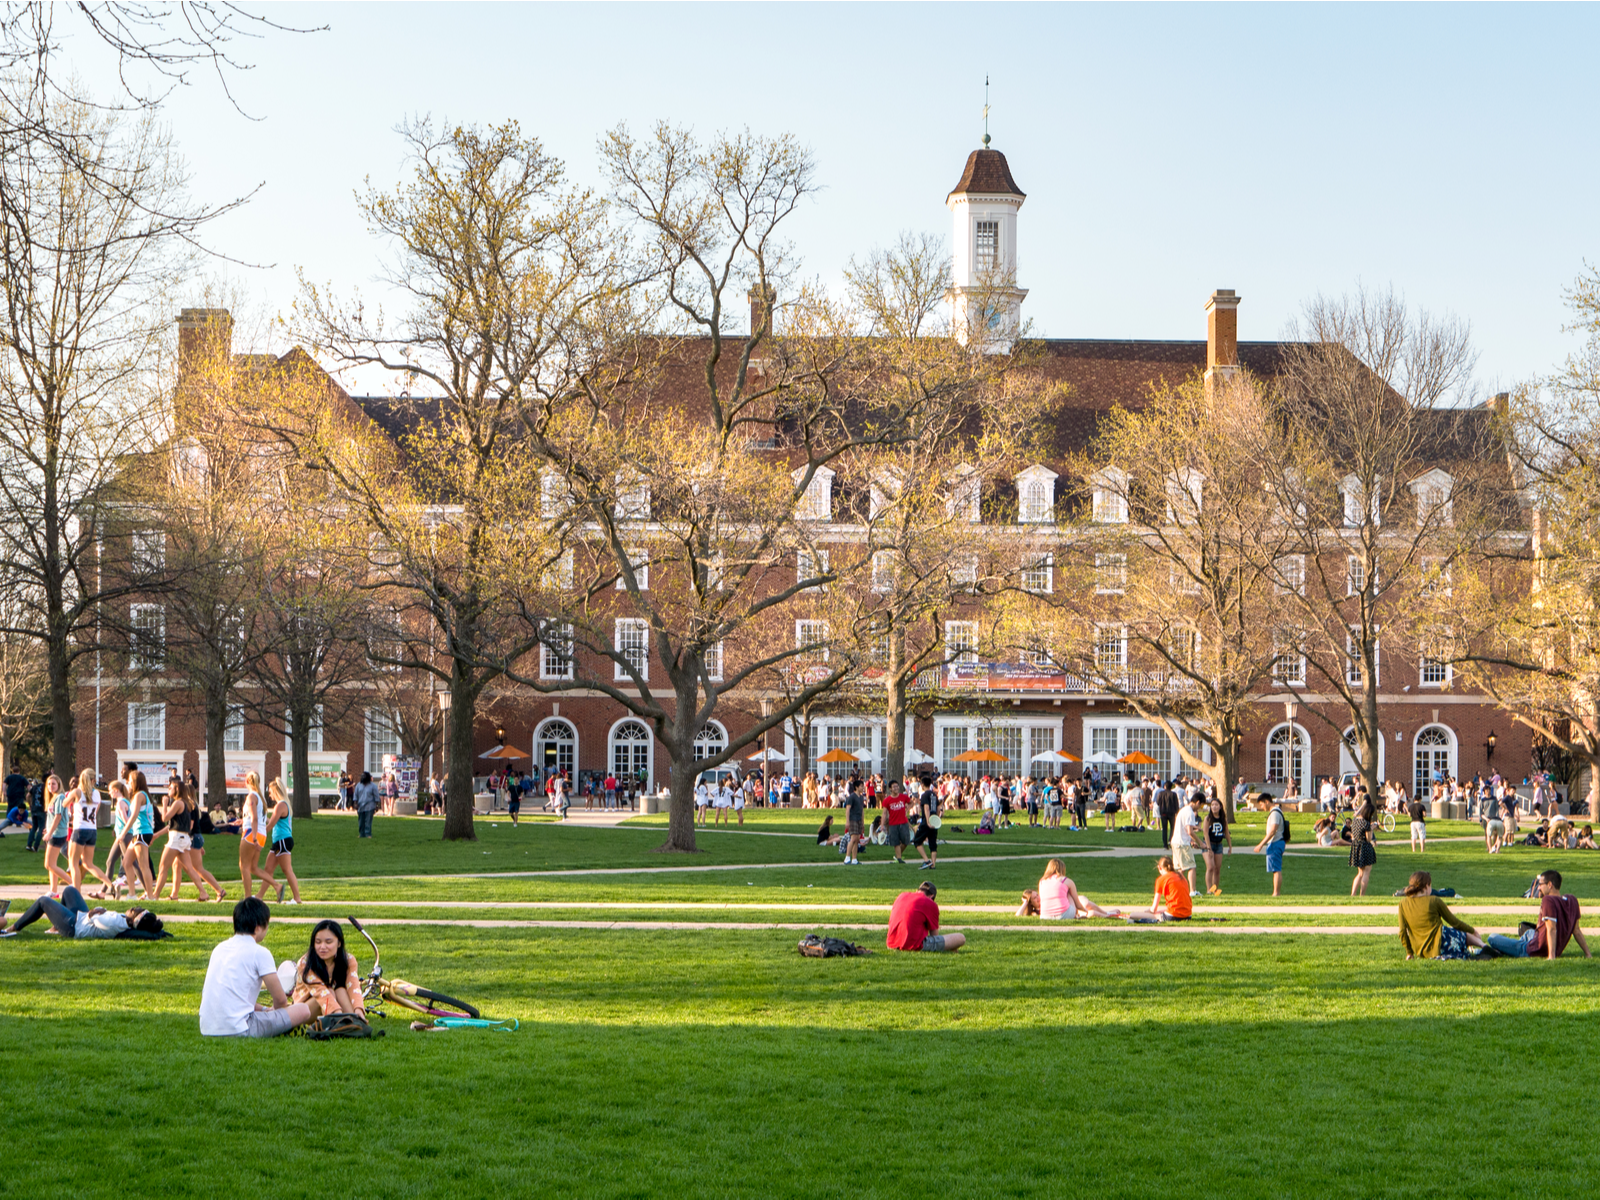 Students walking and sitting at the clean green lawn during Autumn at the University of Illinois, one of the most beautiful college campuses